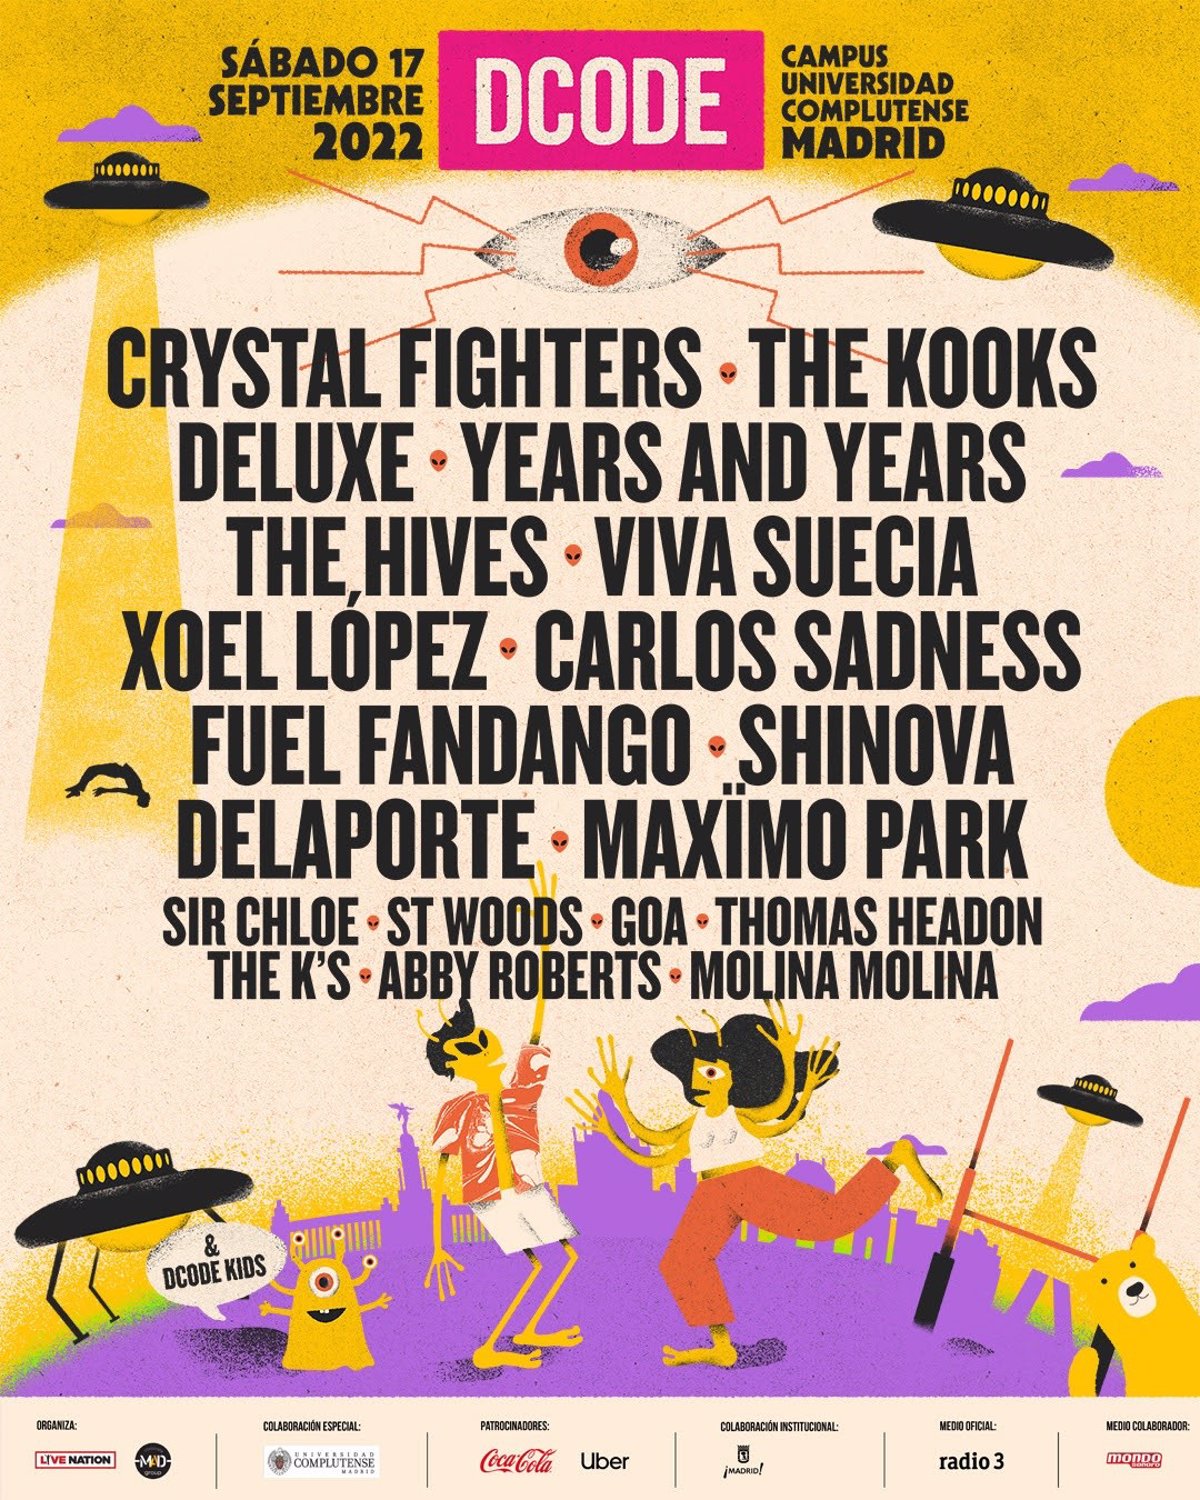 The Dcode festival announces Crystal Fighters, The Kooks the return of Deluxe for its 2022 edition